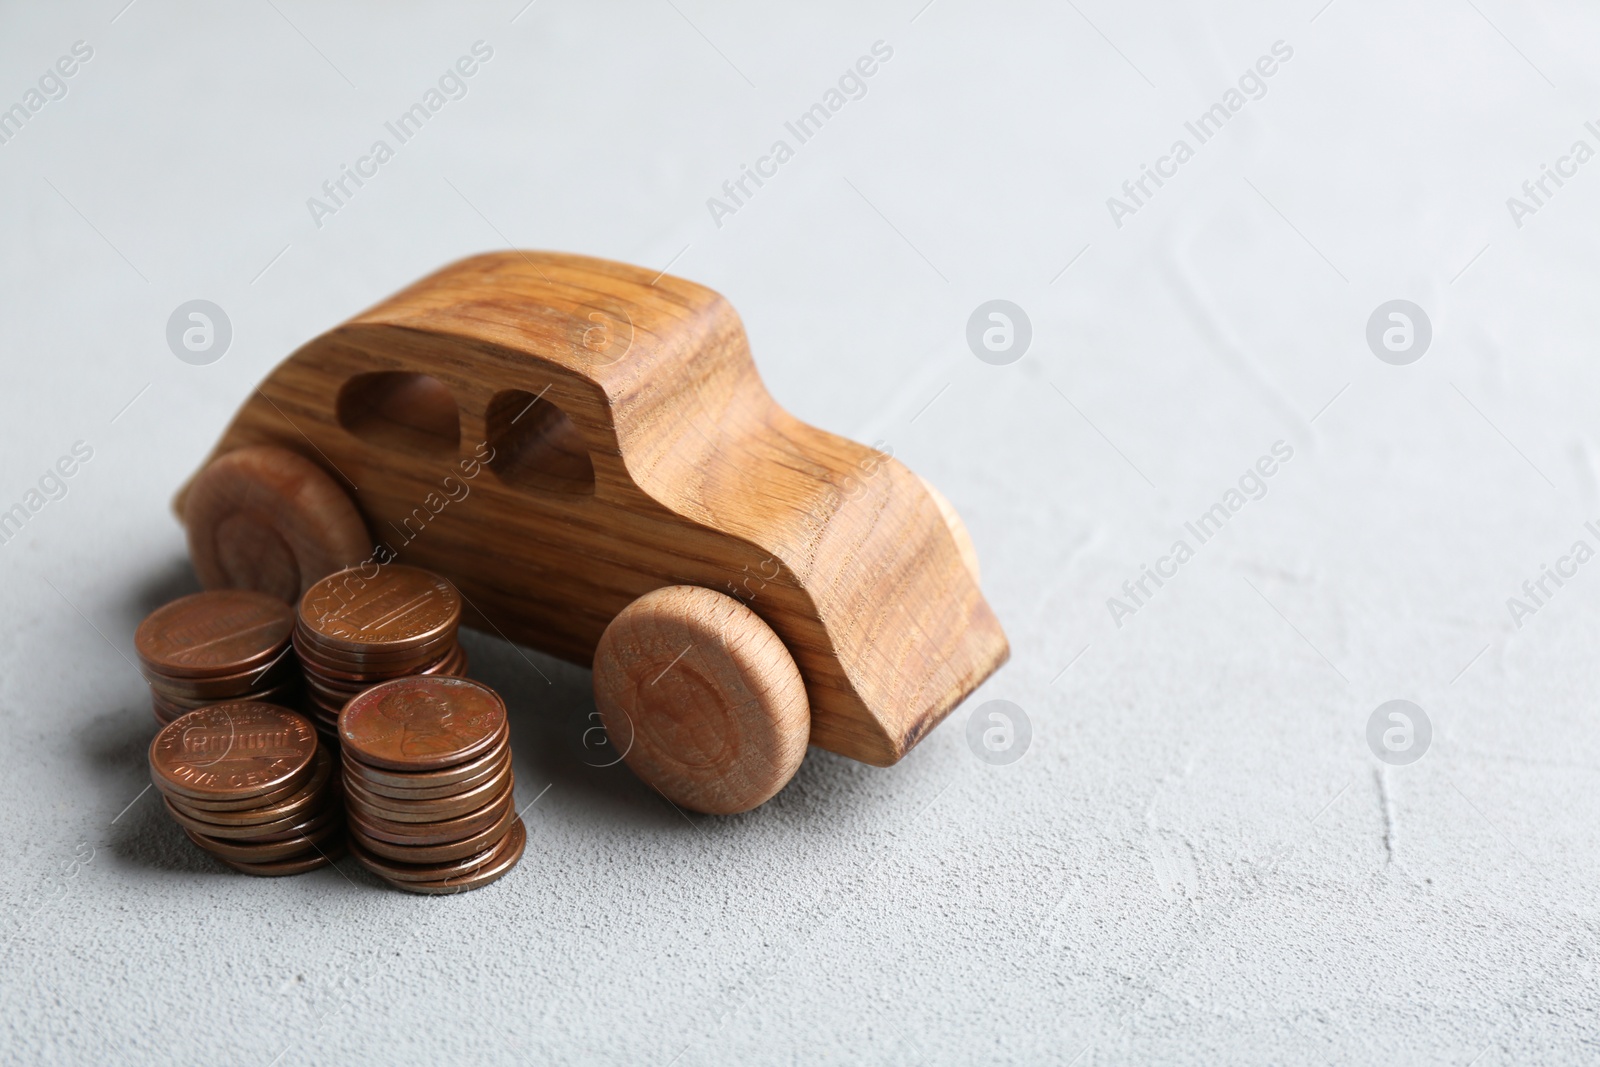 Photo of Wooden car model and coins on table. Space for text